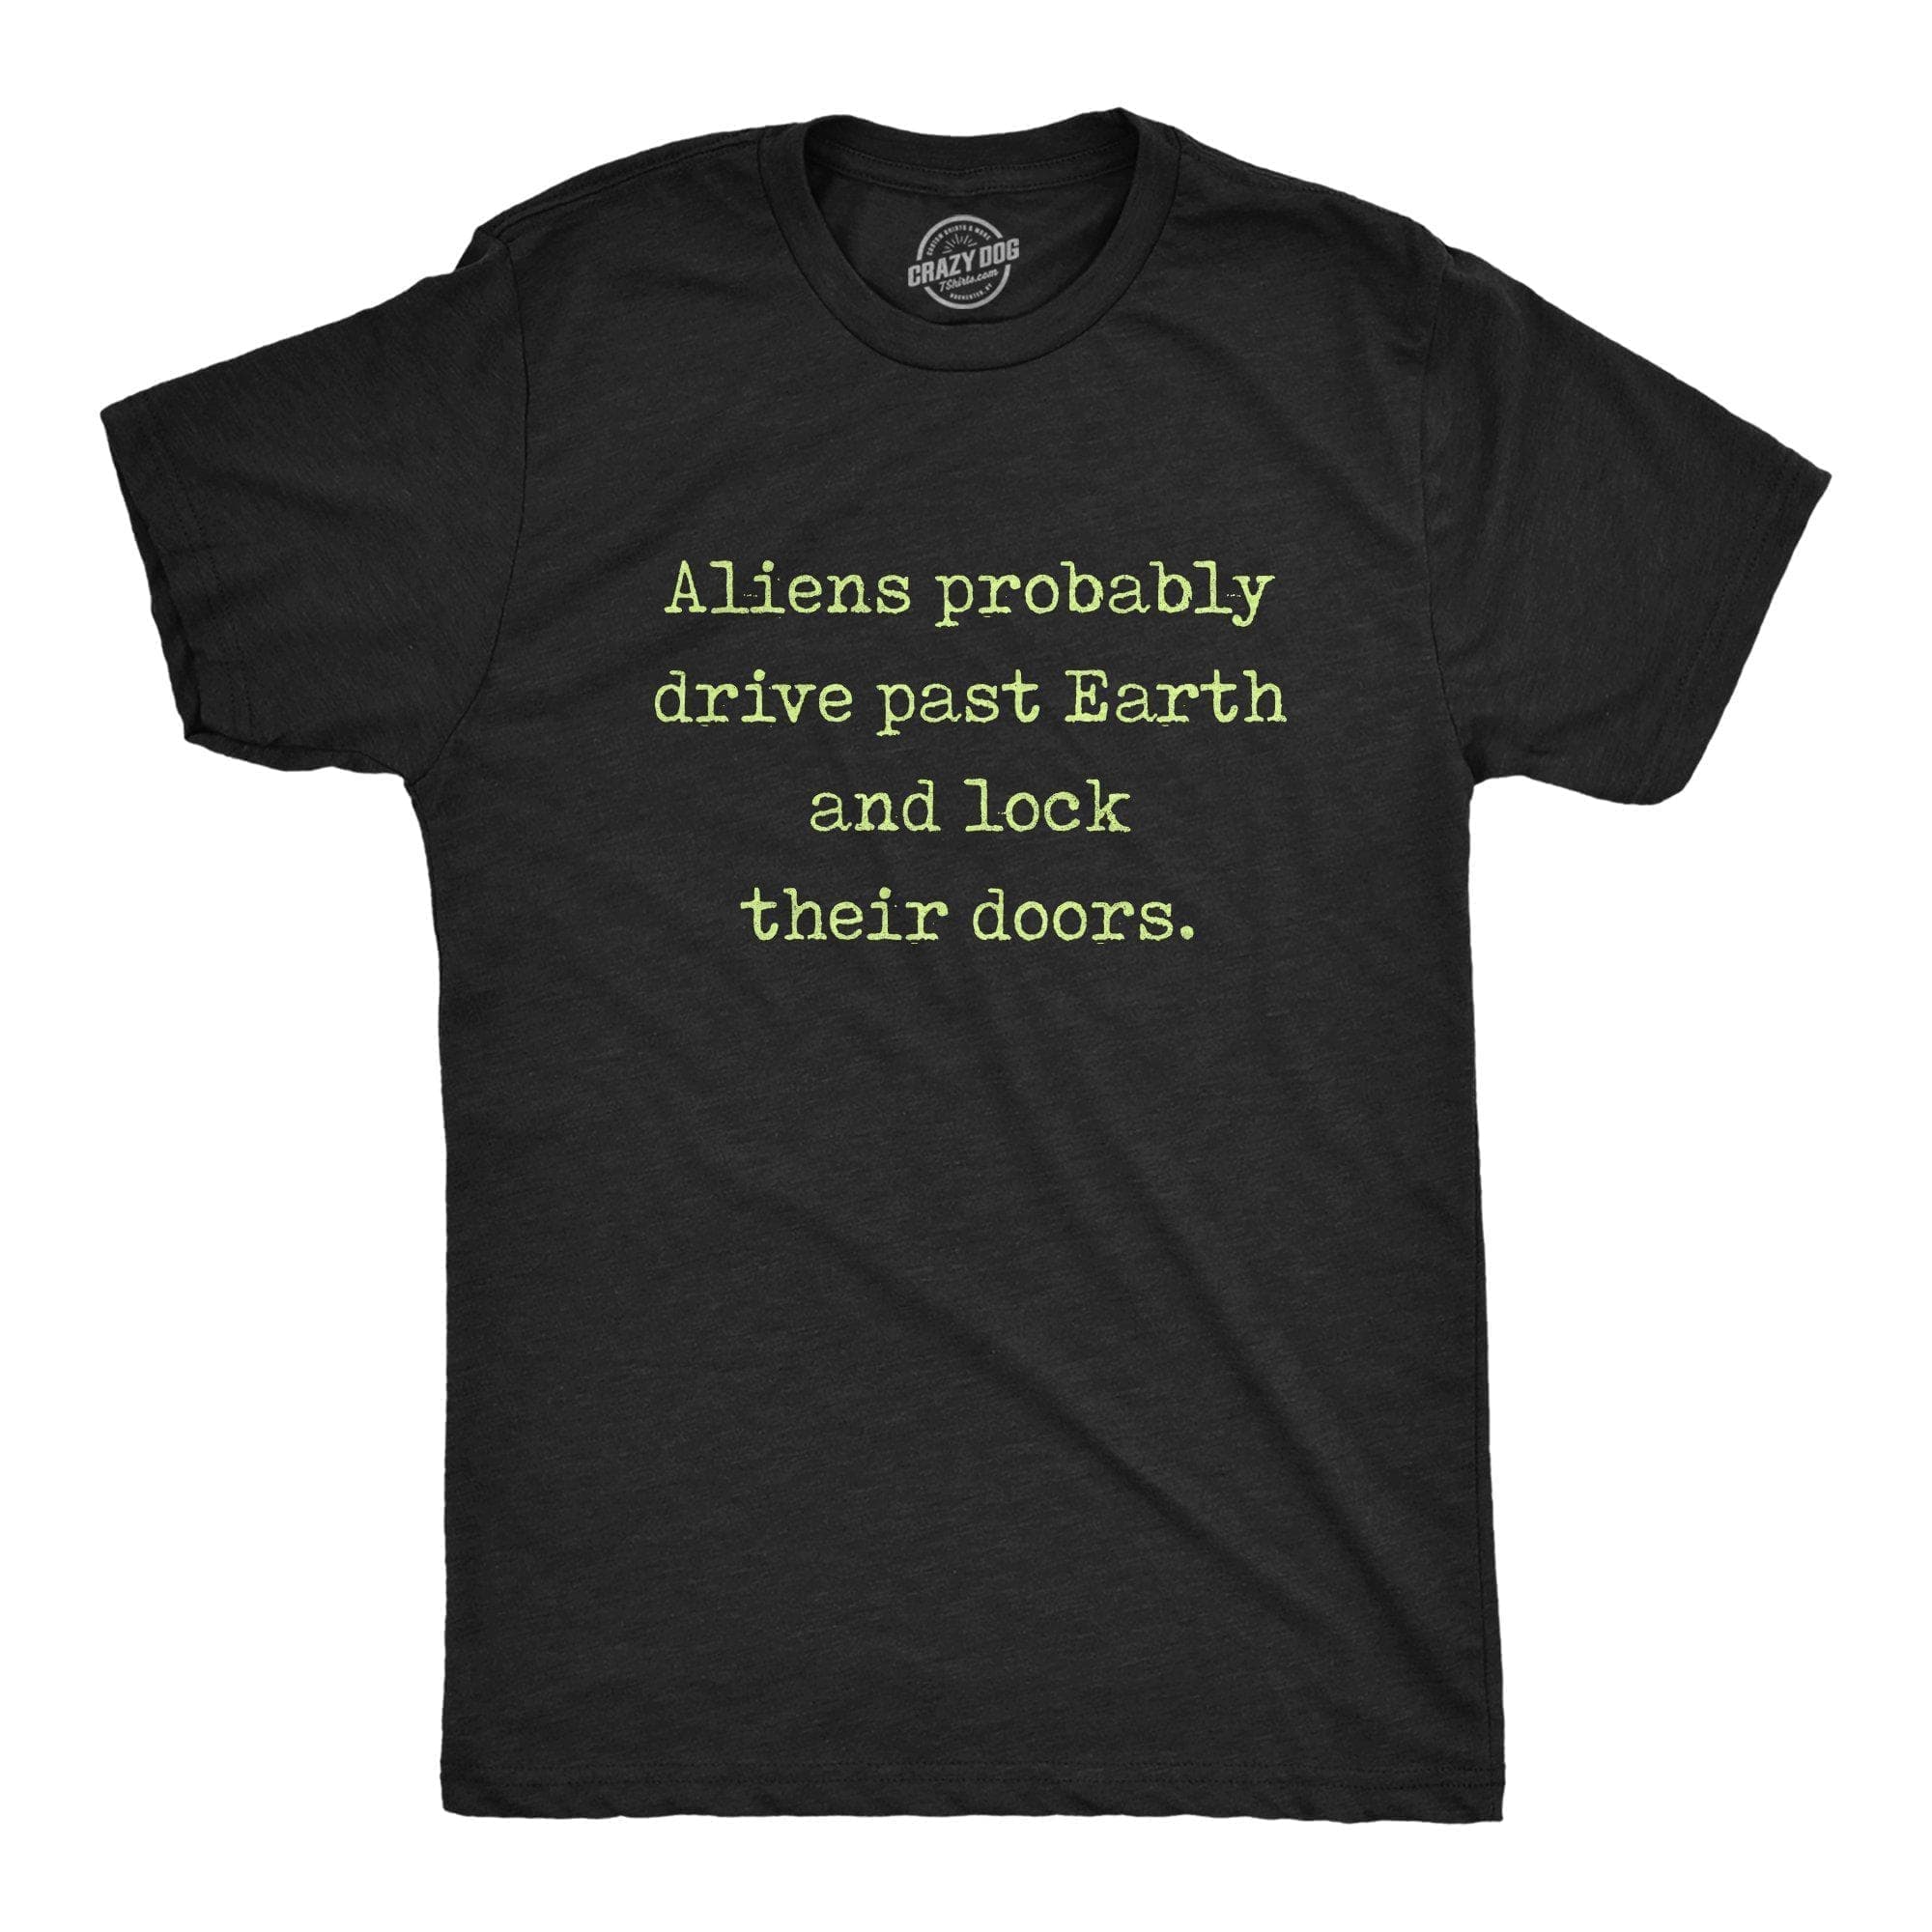 Aliens Probably Drive Past Earth And Lock Their Doors Men's Tshirt - Crazy Dog T-Shirts